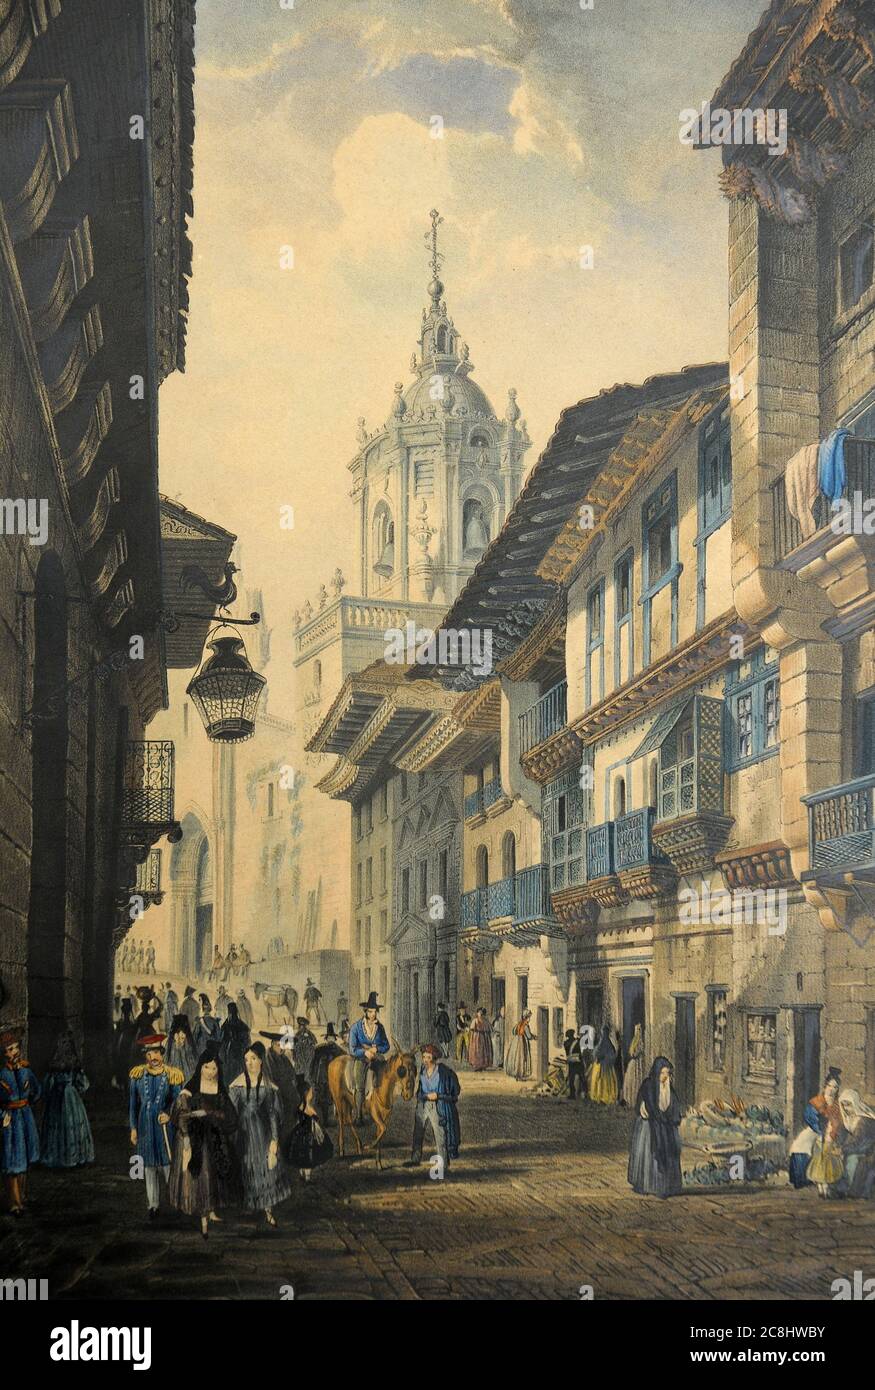 old antique colored engraving of main street of Fuenterrabia, ,Hondarribia, Spain. Stock Photo